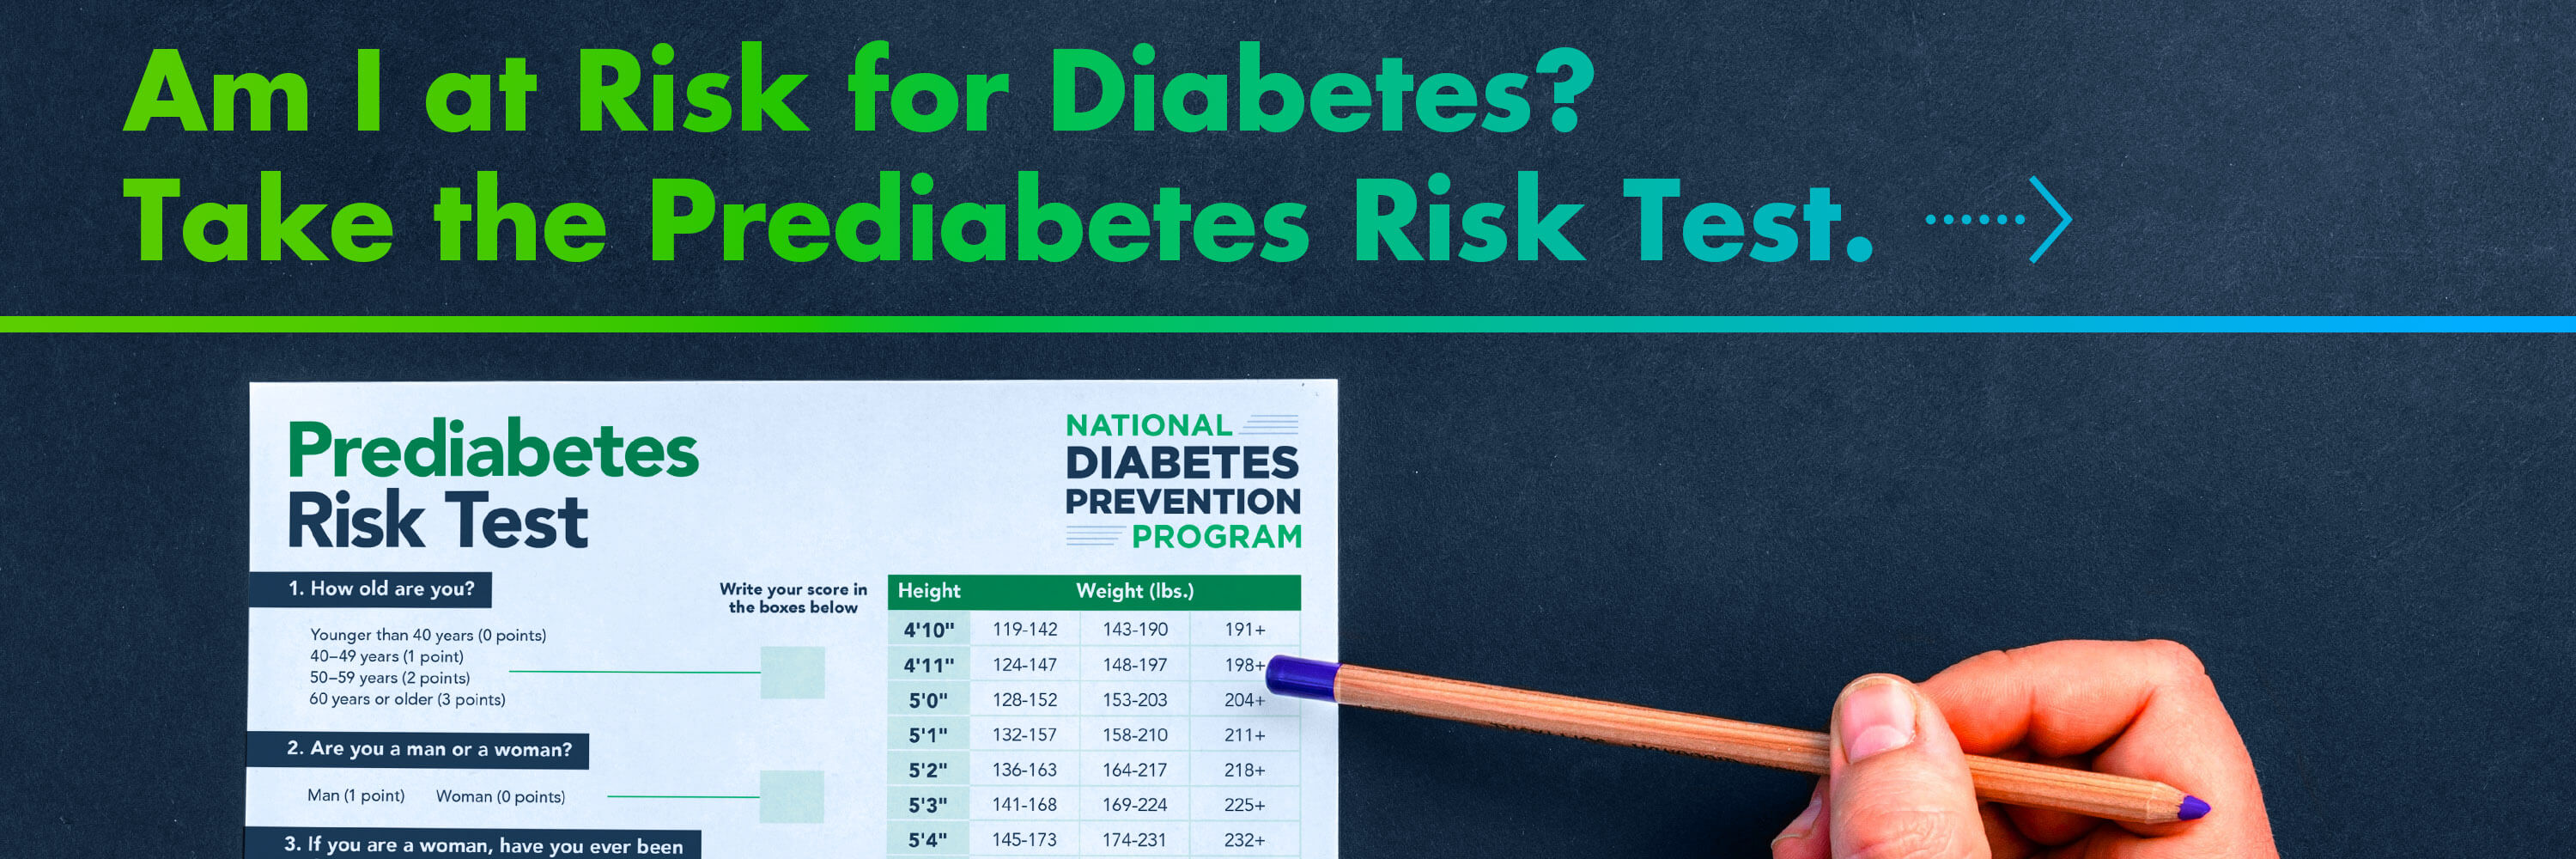 Am I at Risk for Diabetes?